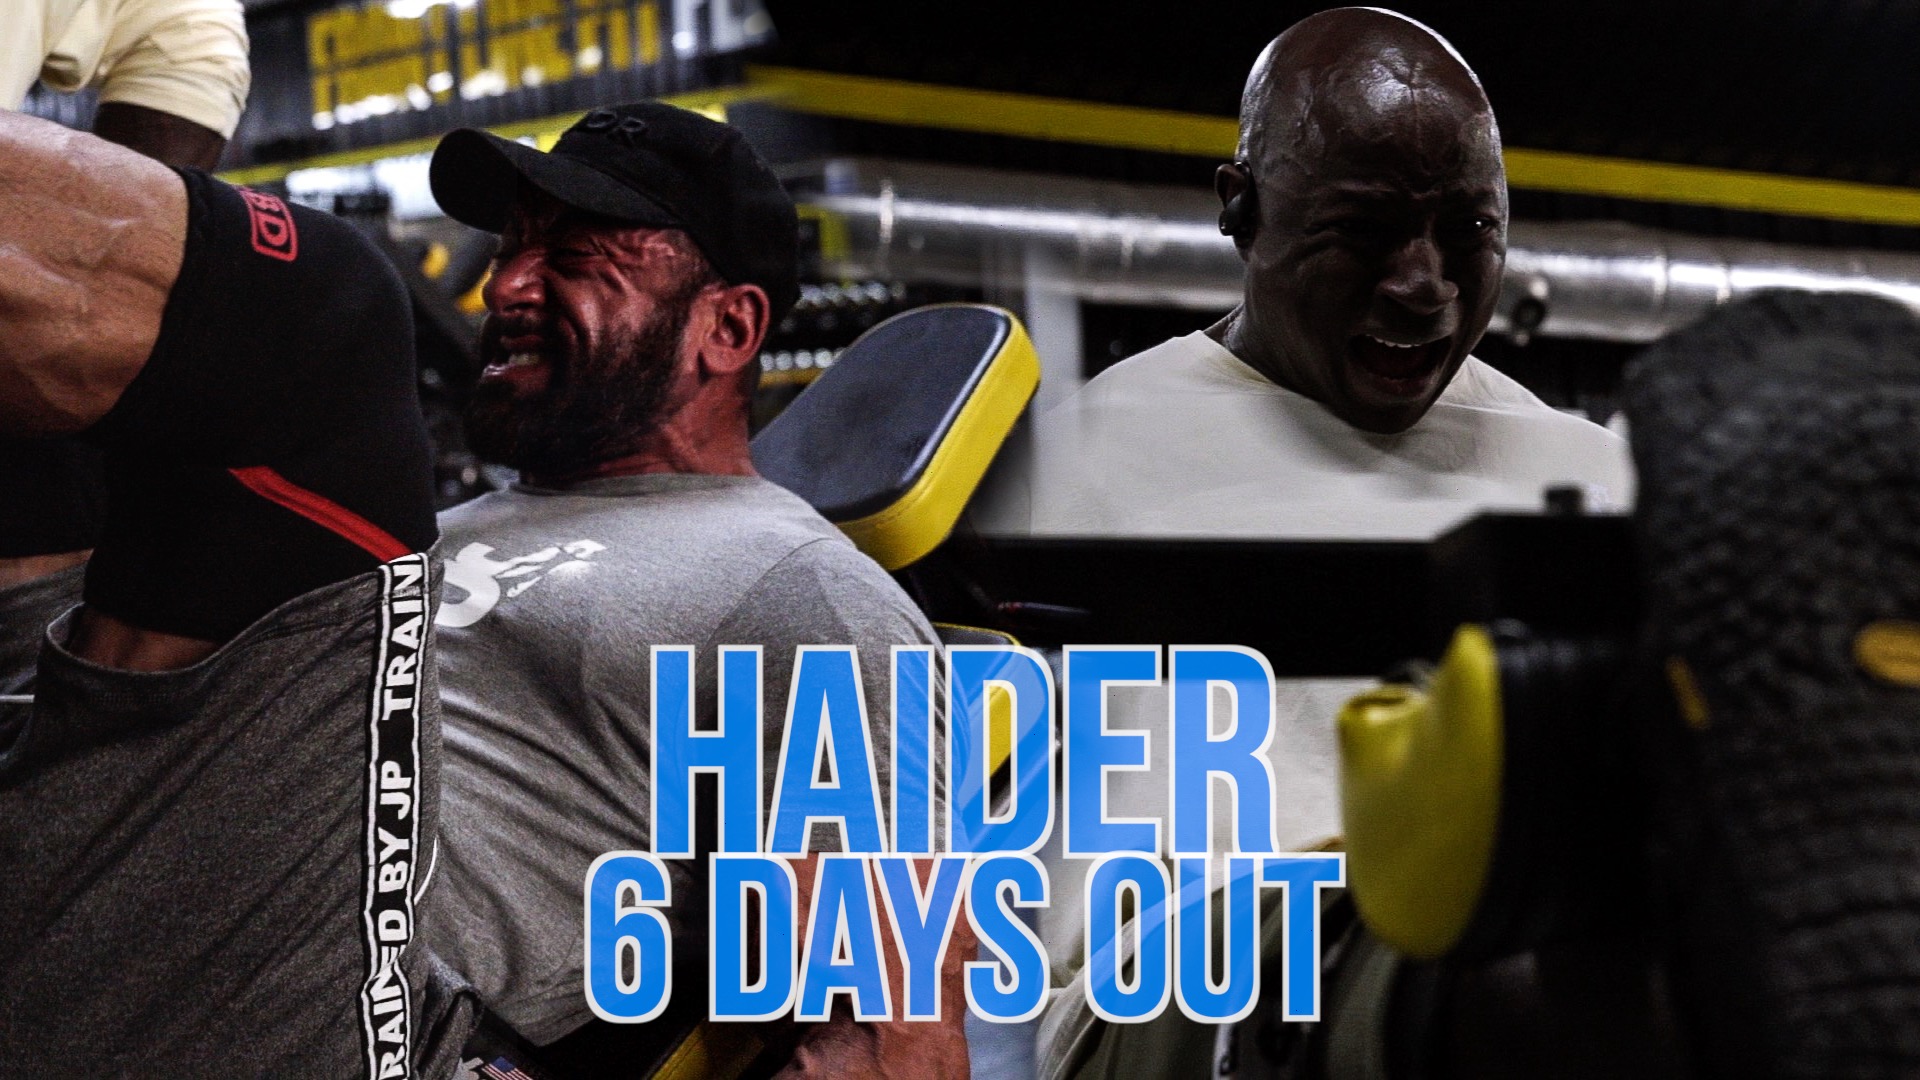 Haider 6 Days Out